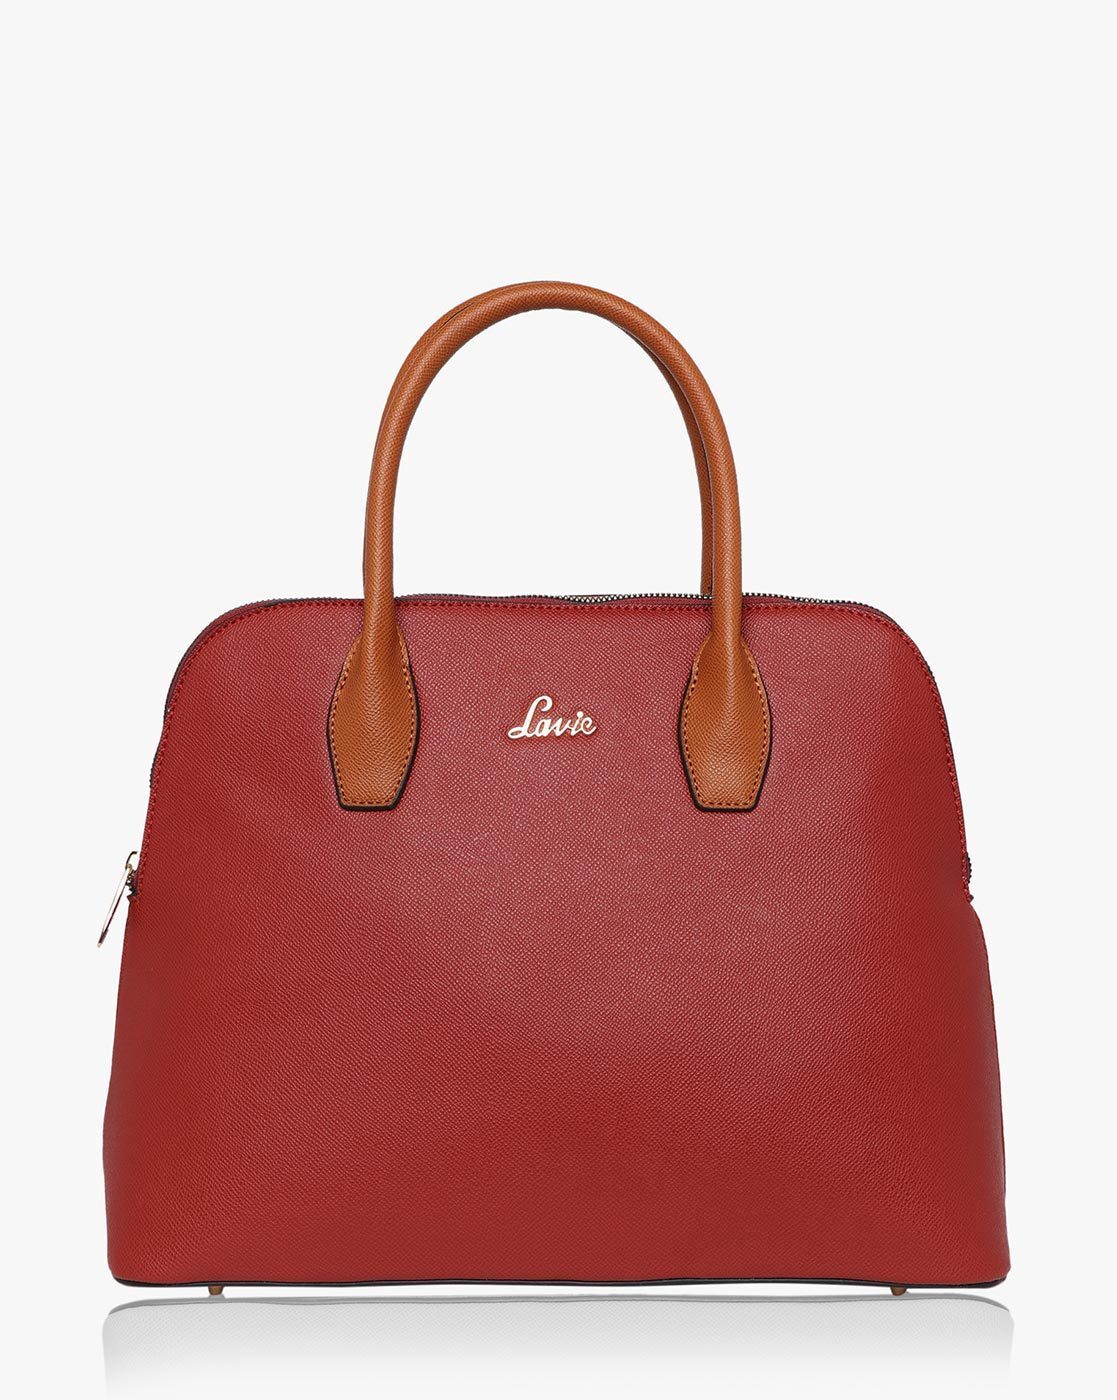 Lavie Mumbai Handbags Sale Leather Stores Offers Numbers Discounts